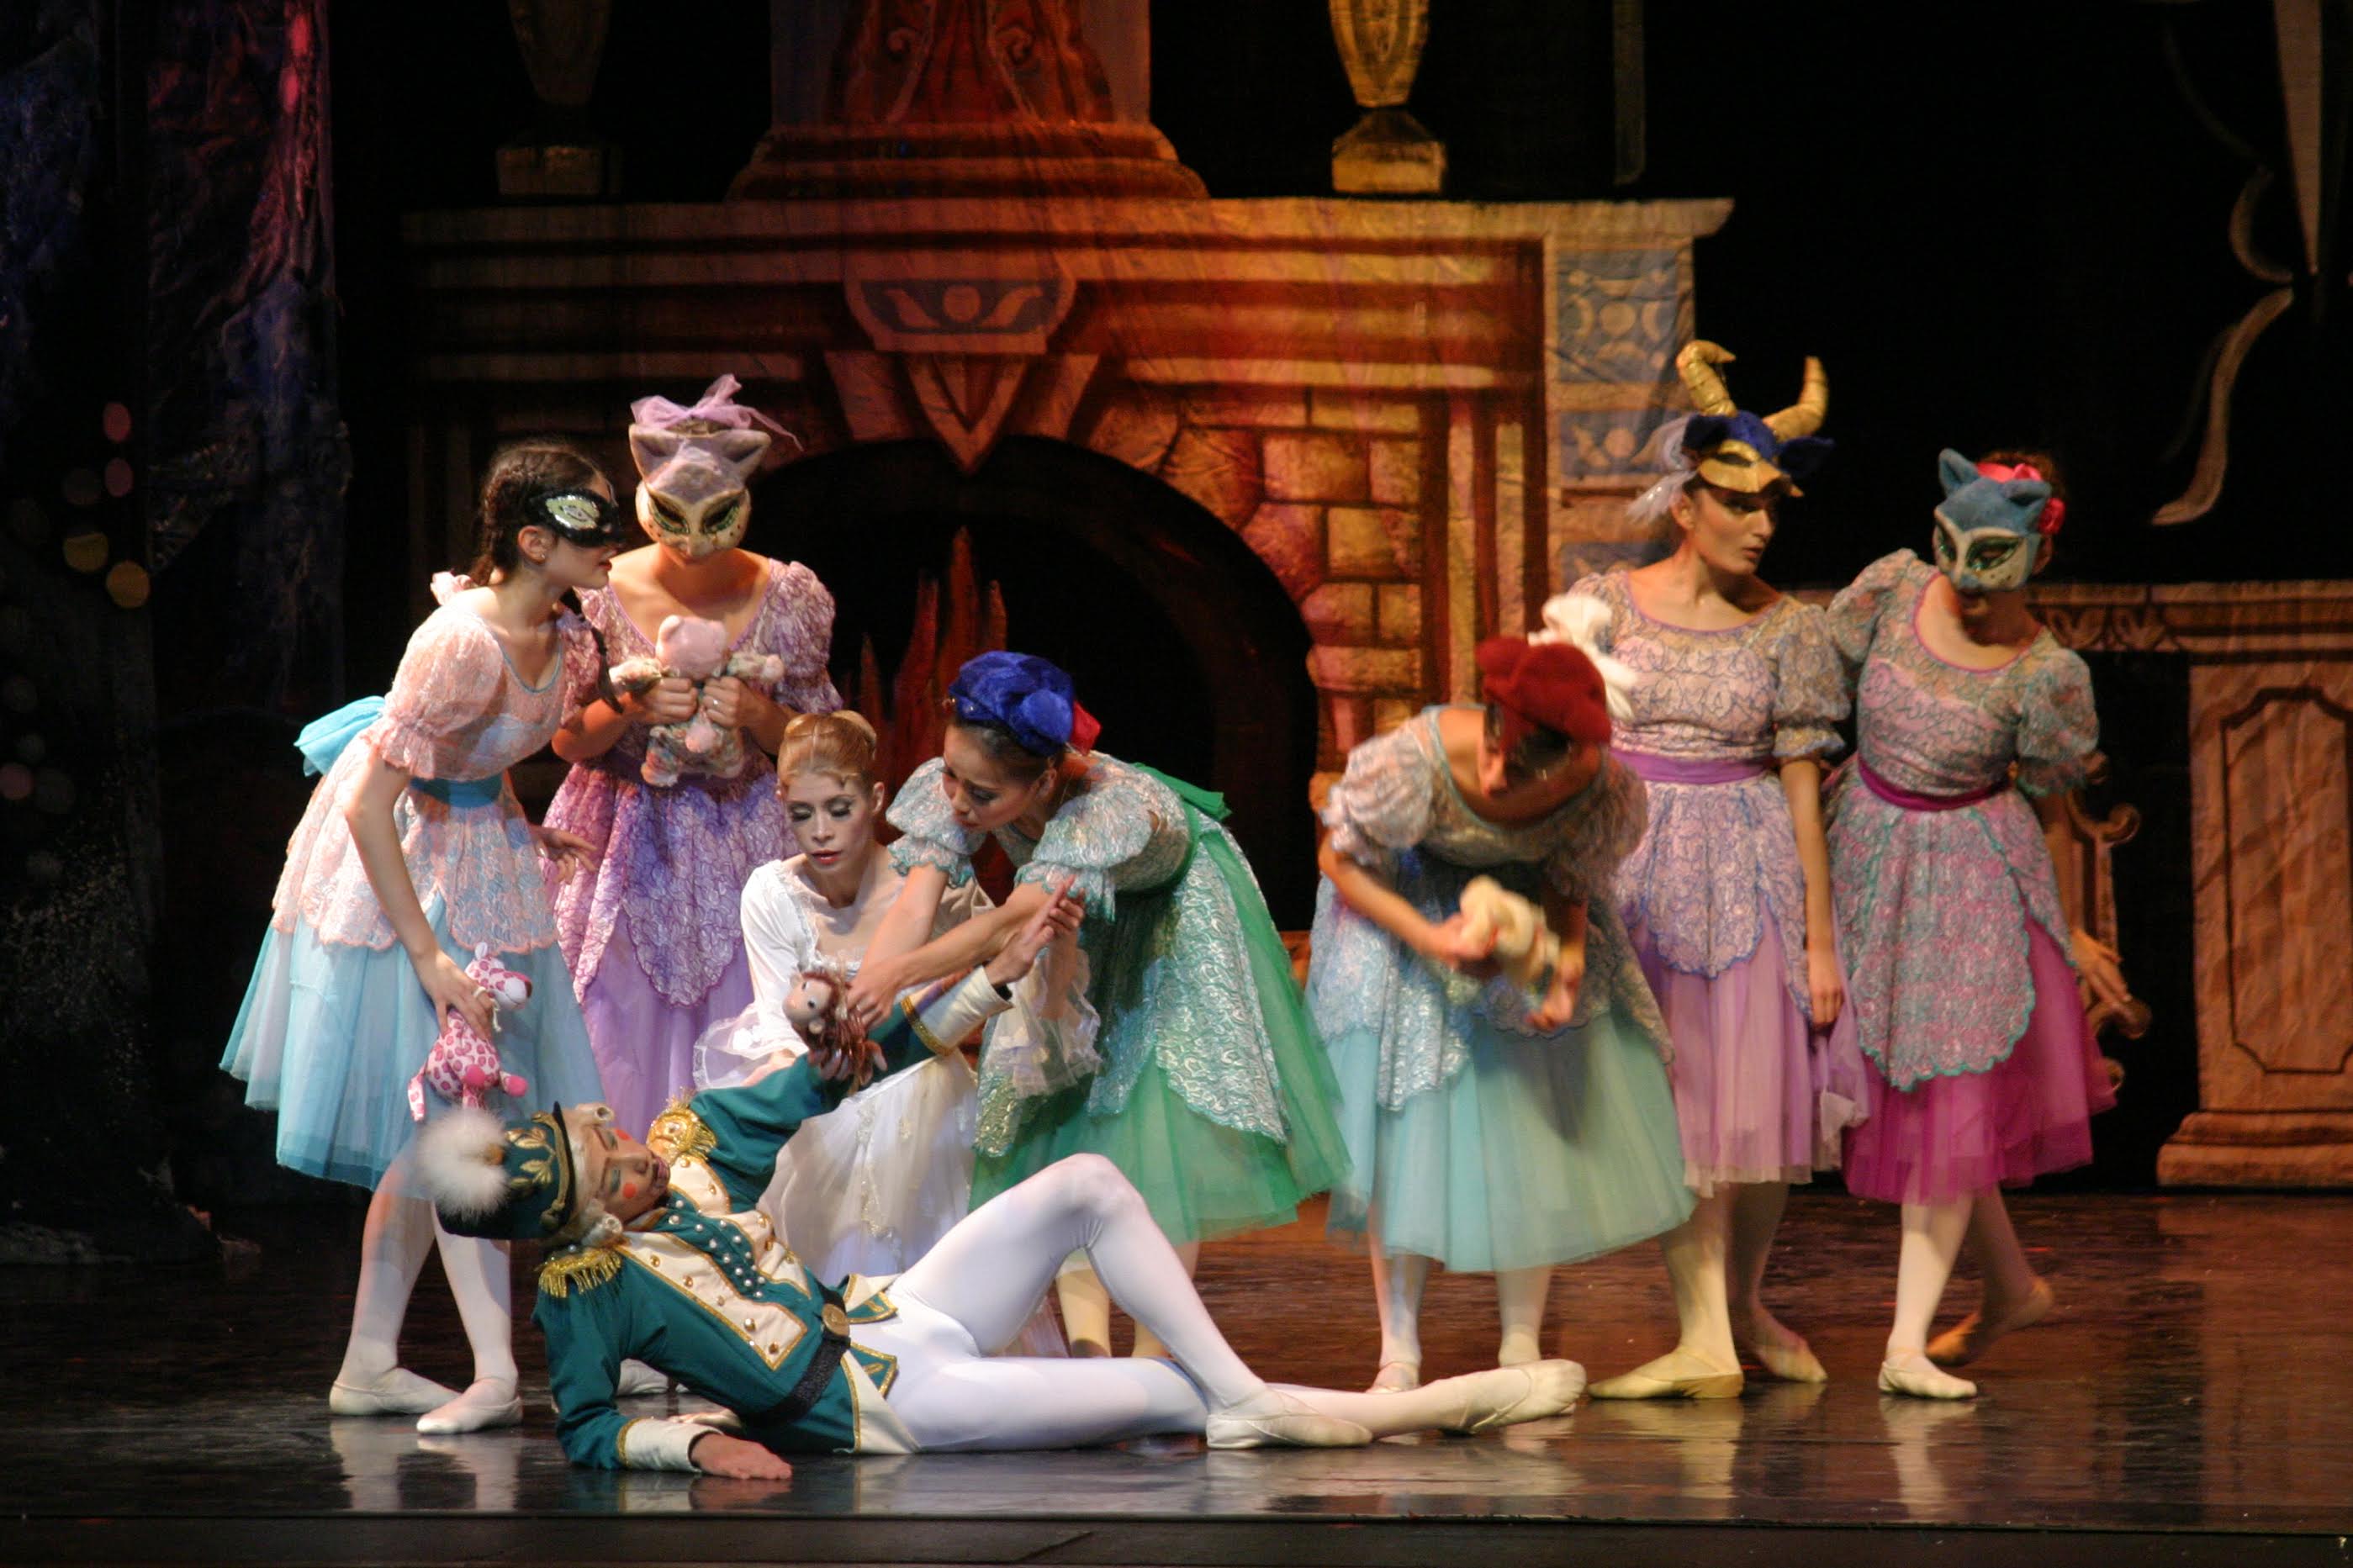 CASSE NOISETTE - THE MOSCOW CITY BALLET